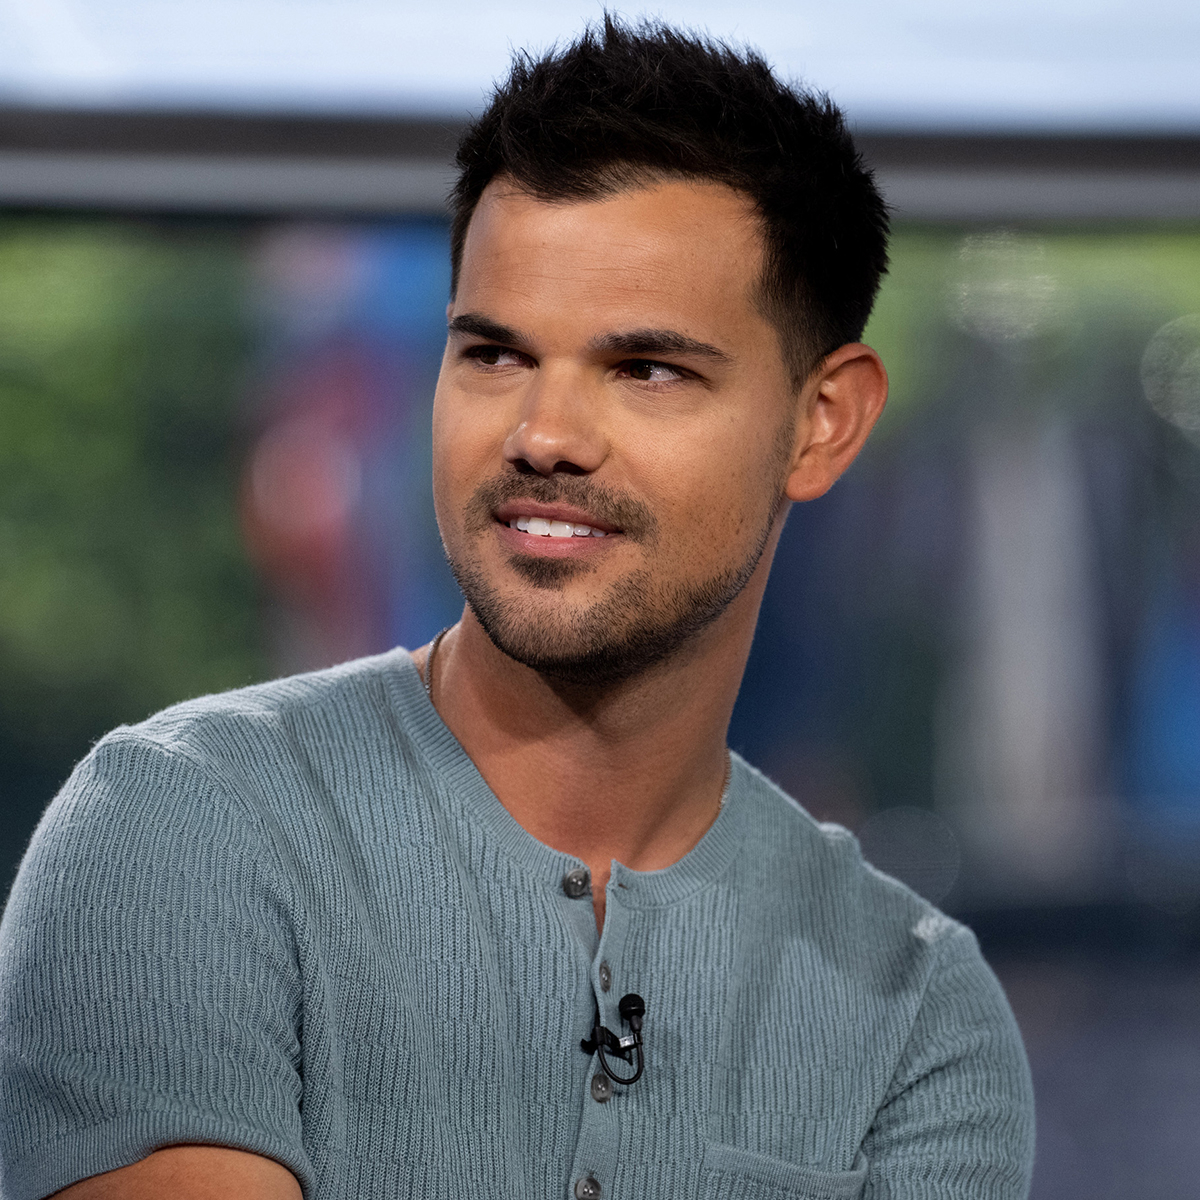 Taylor Lautner Calls Out Hateful Comments Saying He “Did Not Age Well”